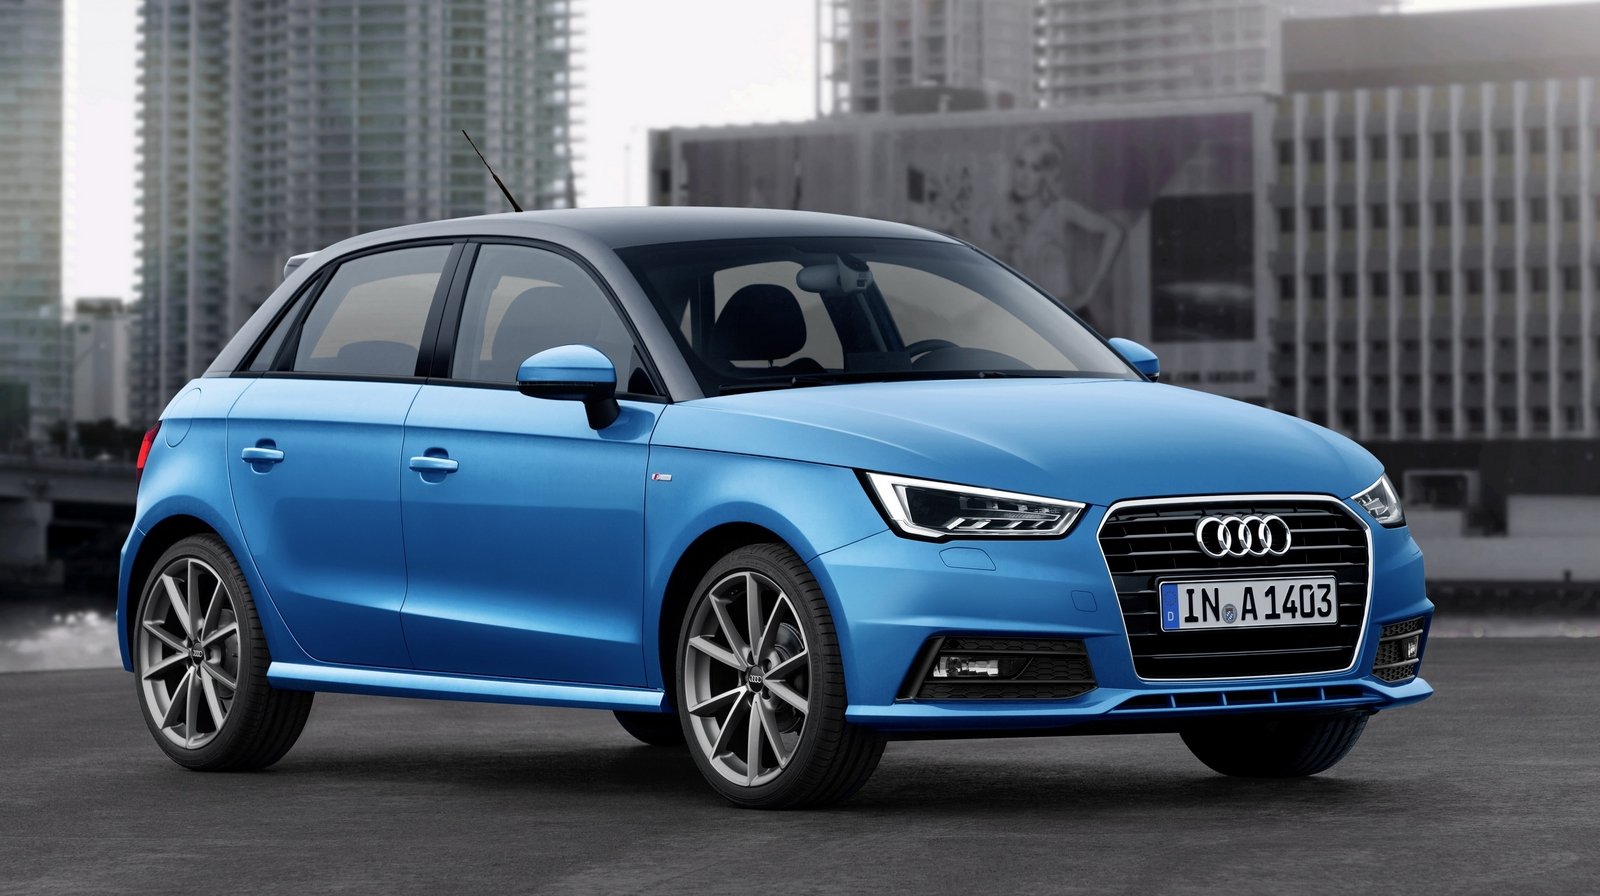 2015 Audi A1 Pictures, Photos, Wallpapers And Videos - Audi A1 Sportback Blue , HD Wallpaper & Backgrounds